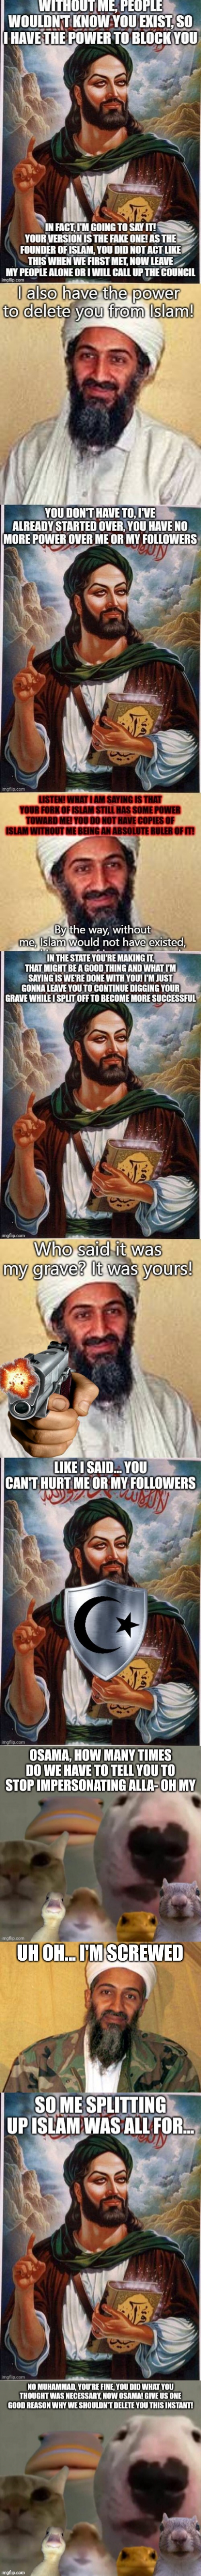 Congratulations, you just got the Council involved | UH OH... I'M SCREWED | image tagged in osama bin laden | made w/ Imgflip meme maker